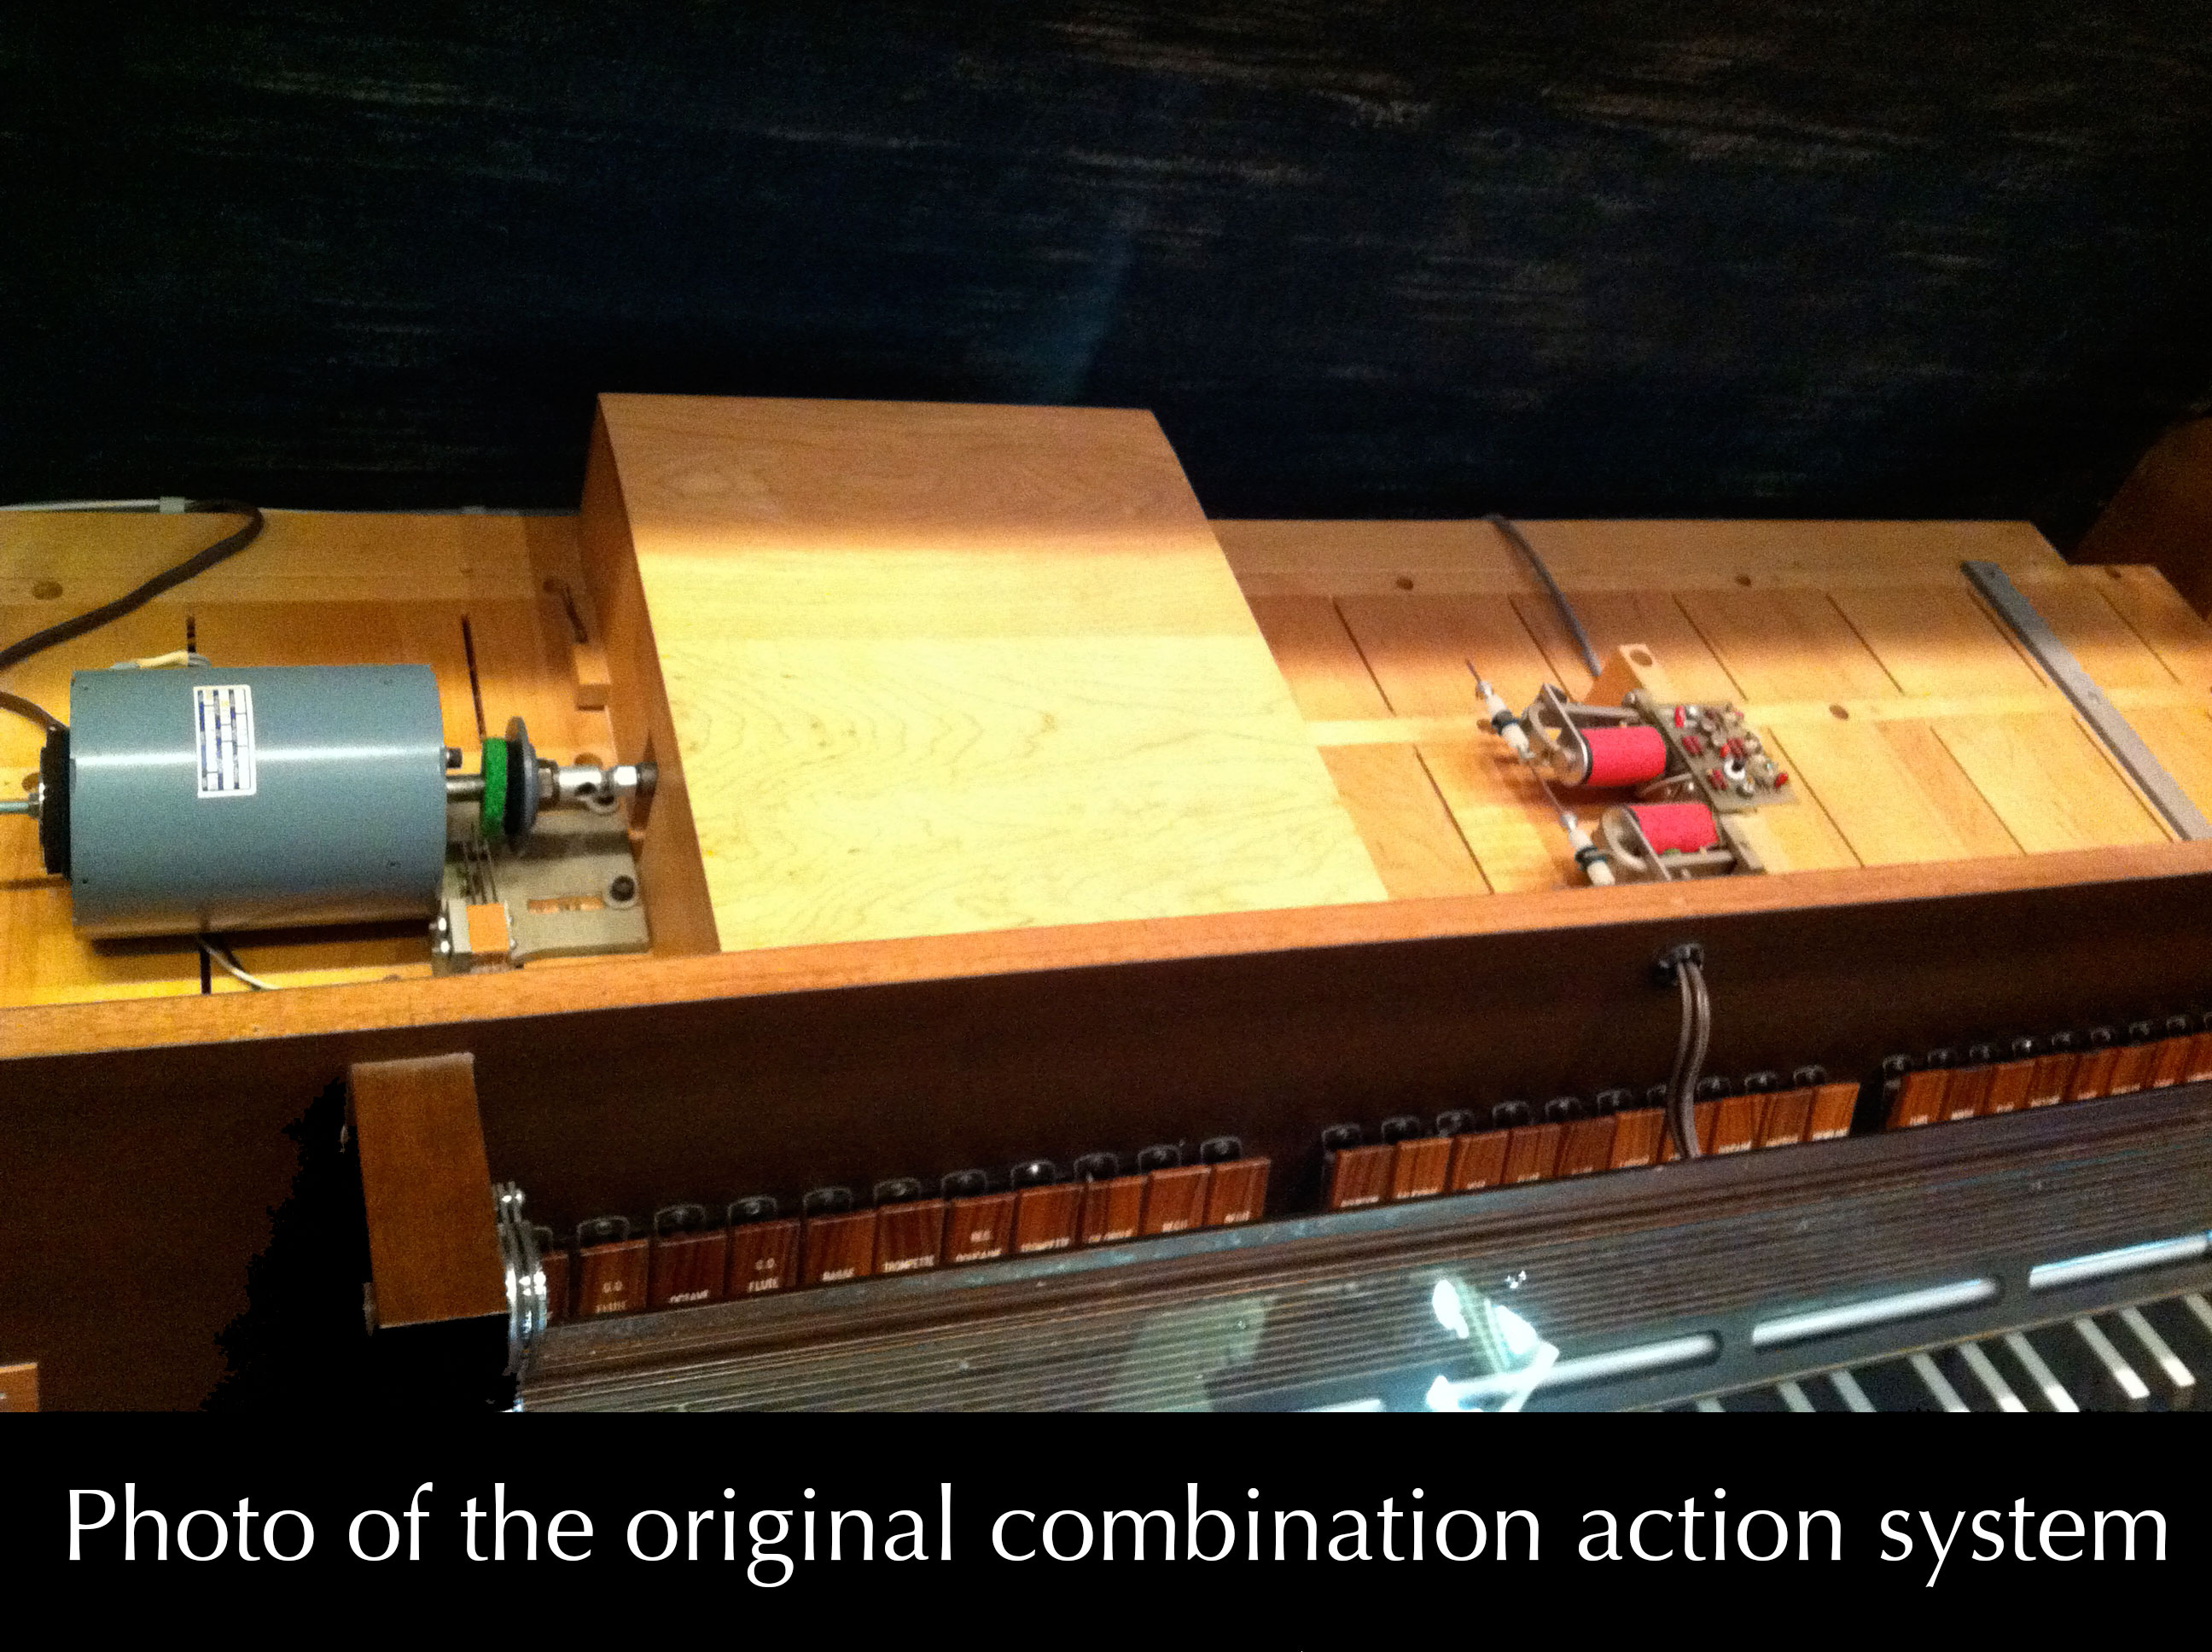 Photo of the old combination action